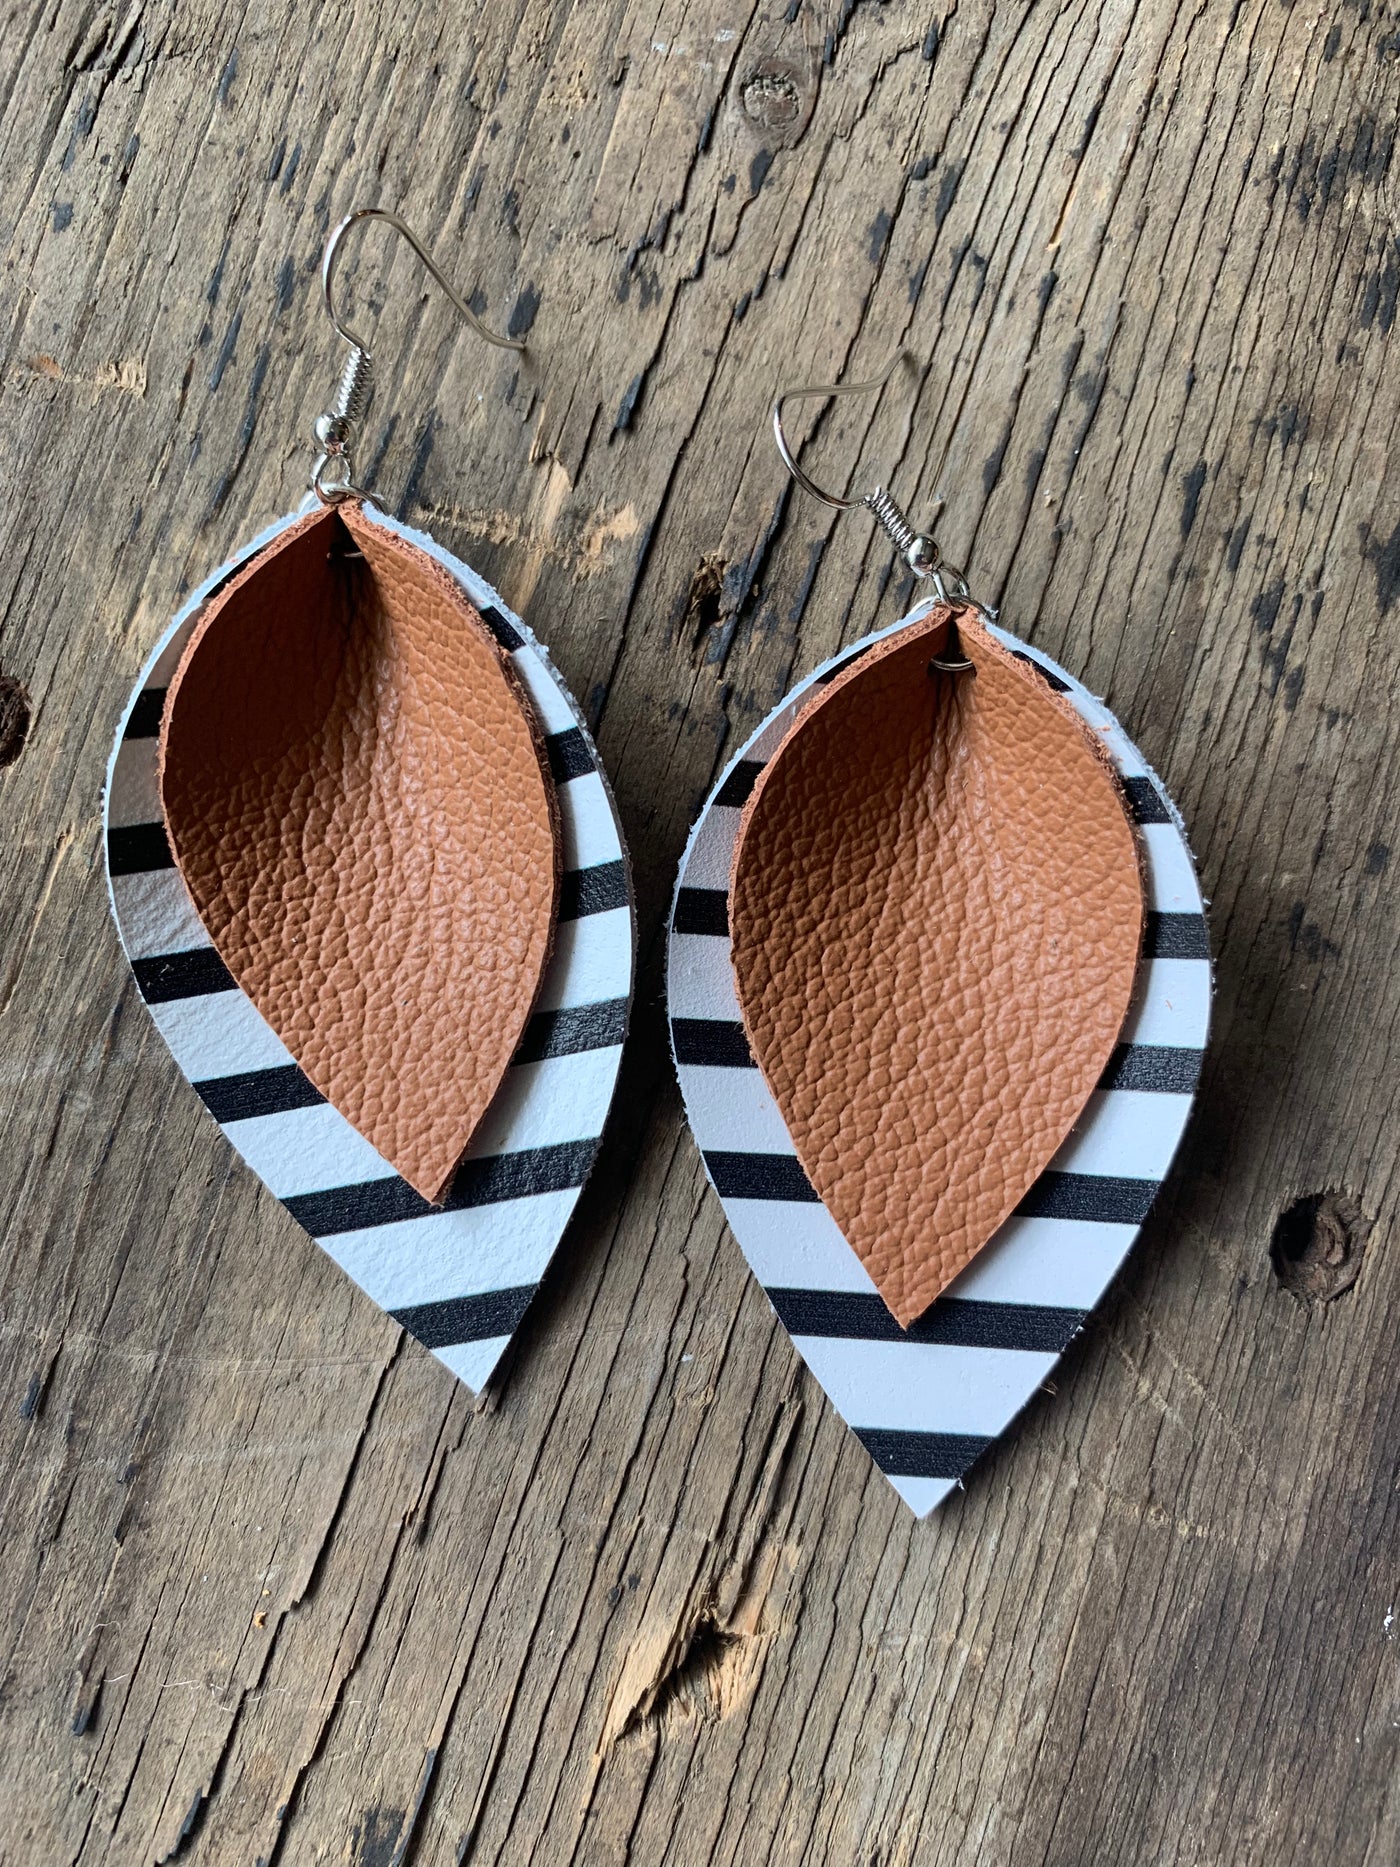 Black and white stripe with brown leather earrings - Jill's Jewels | Unique, Handcrafted, Trendy, And Fun Jewelry